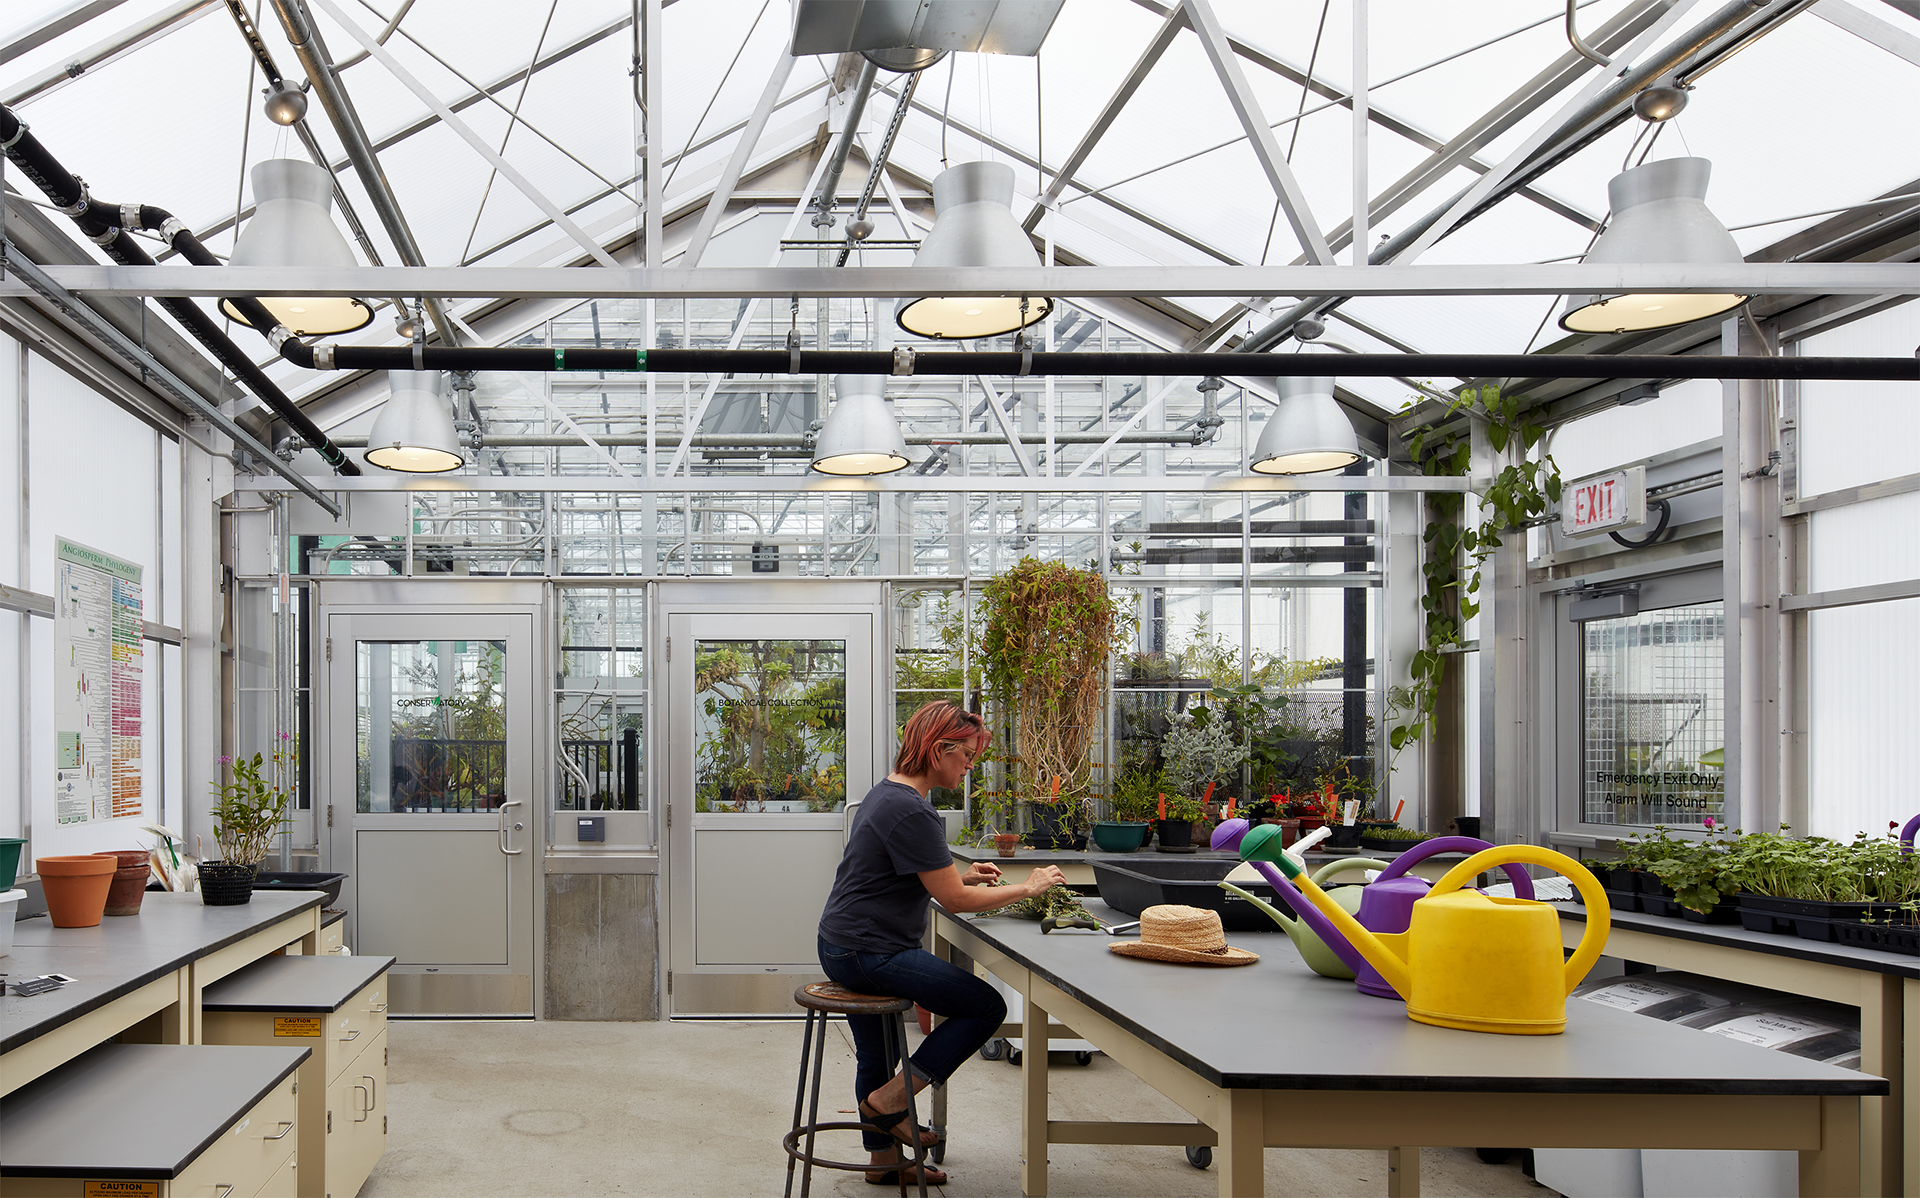 Plant Growth Research Facility